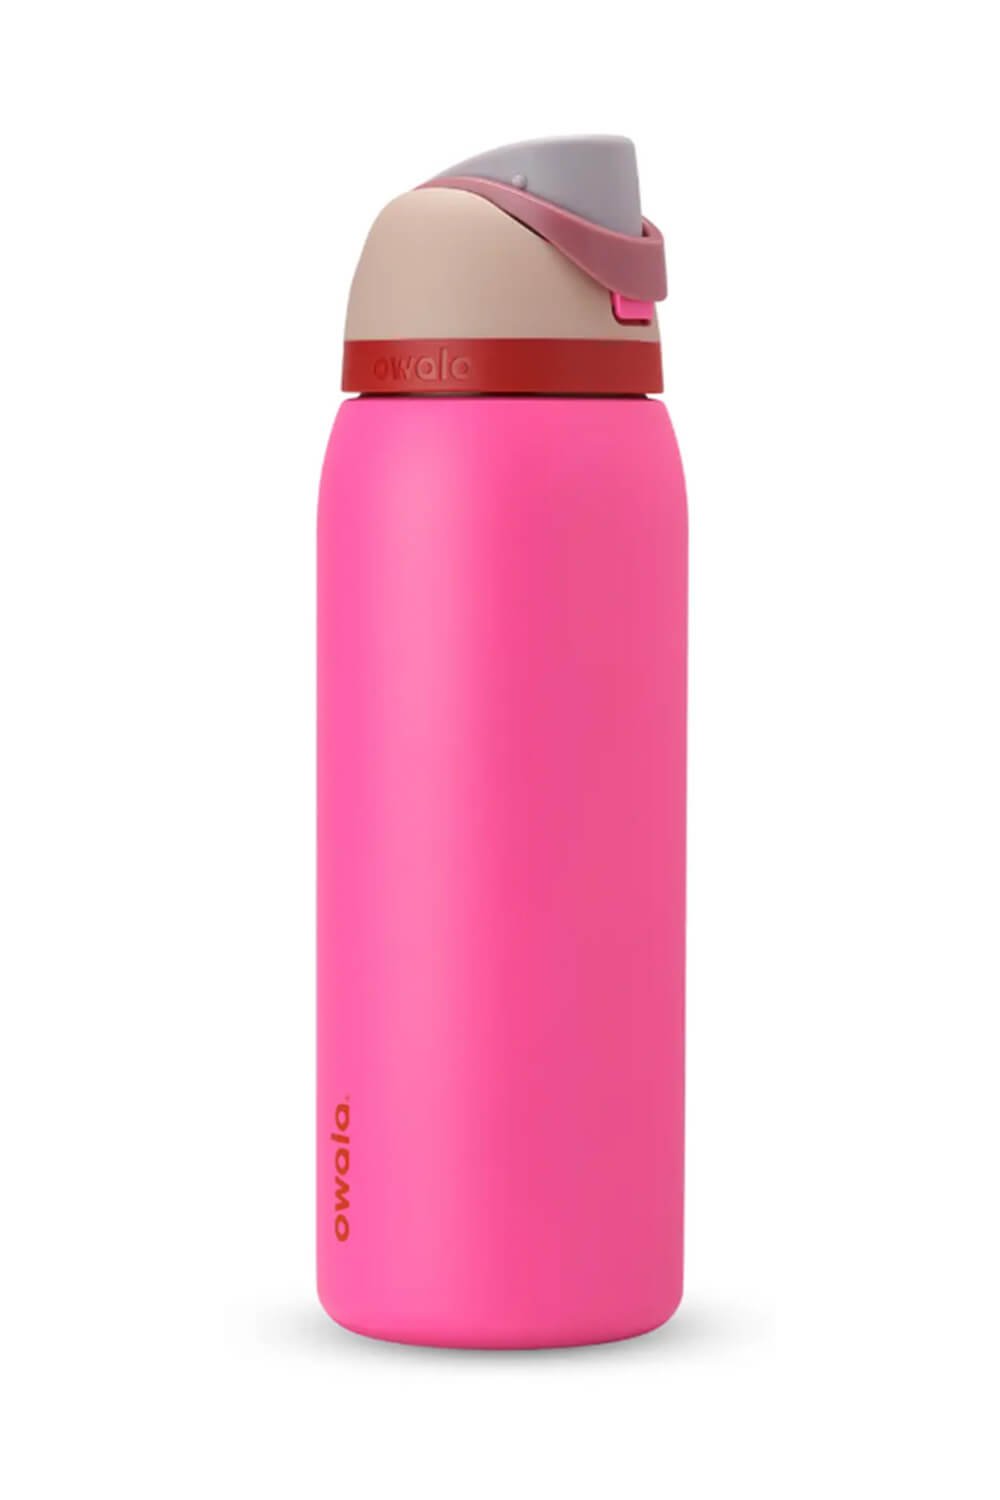  Owala Twist Insulated Stainless Steel Water Bottle for